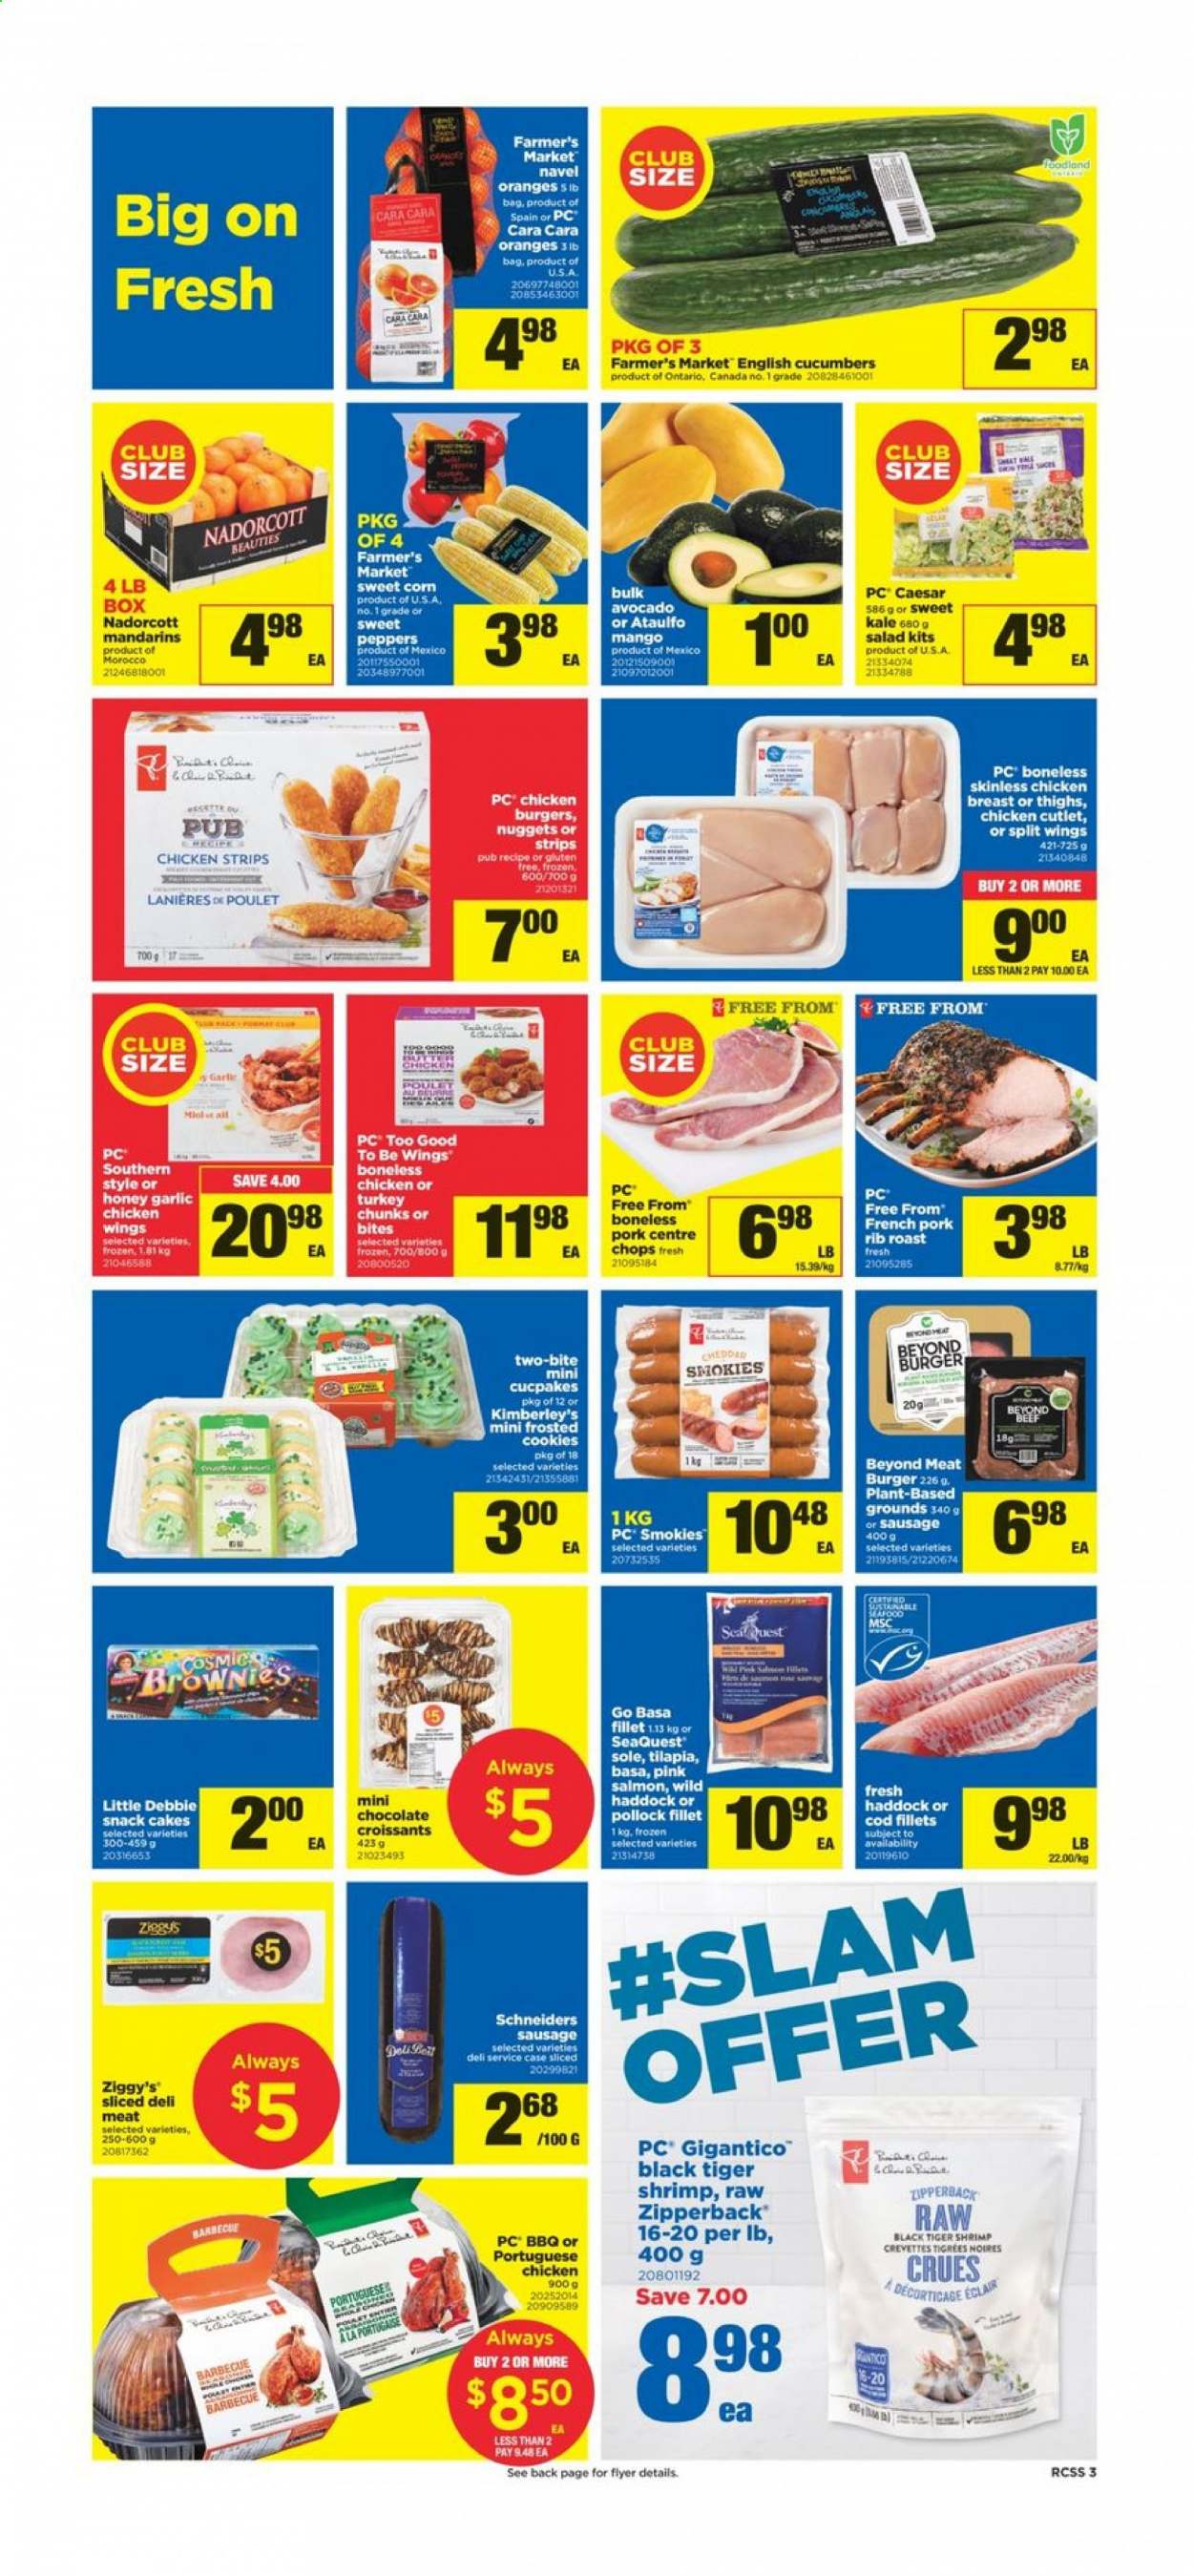 thumbnail - Real Canadian Superstore Flyer - March 11, 2021 - March 17, 2021 - Sales products - cake, croissant, brownies, corn, cucumber, garlic, kale, avocado, mandarines, mango, cod, salmon, tilapia, haddock, pollock, shrimps, nuggets, hamburger, sausage, cheddar, cheese, strips, chicken strips, cookies, chocolate, snack, honey, chicken breasts, chicken. Page 3.